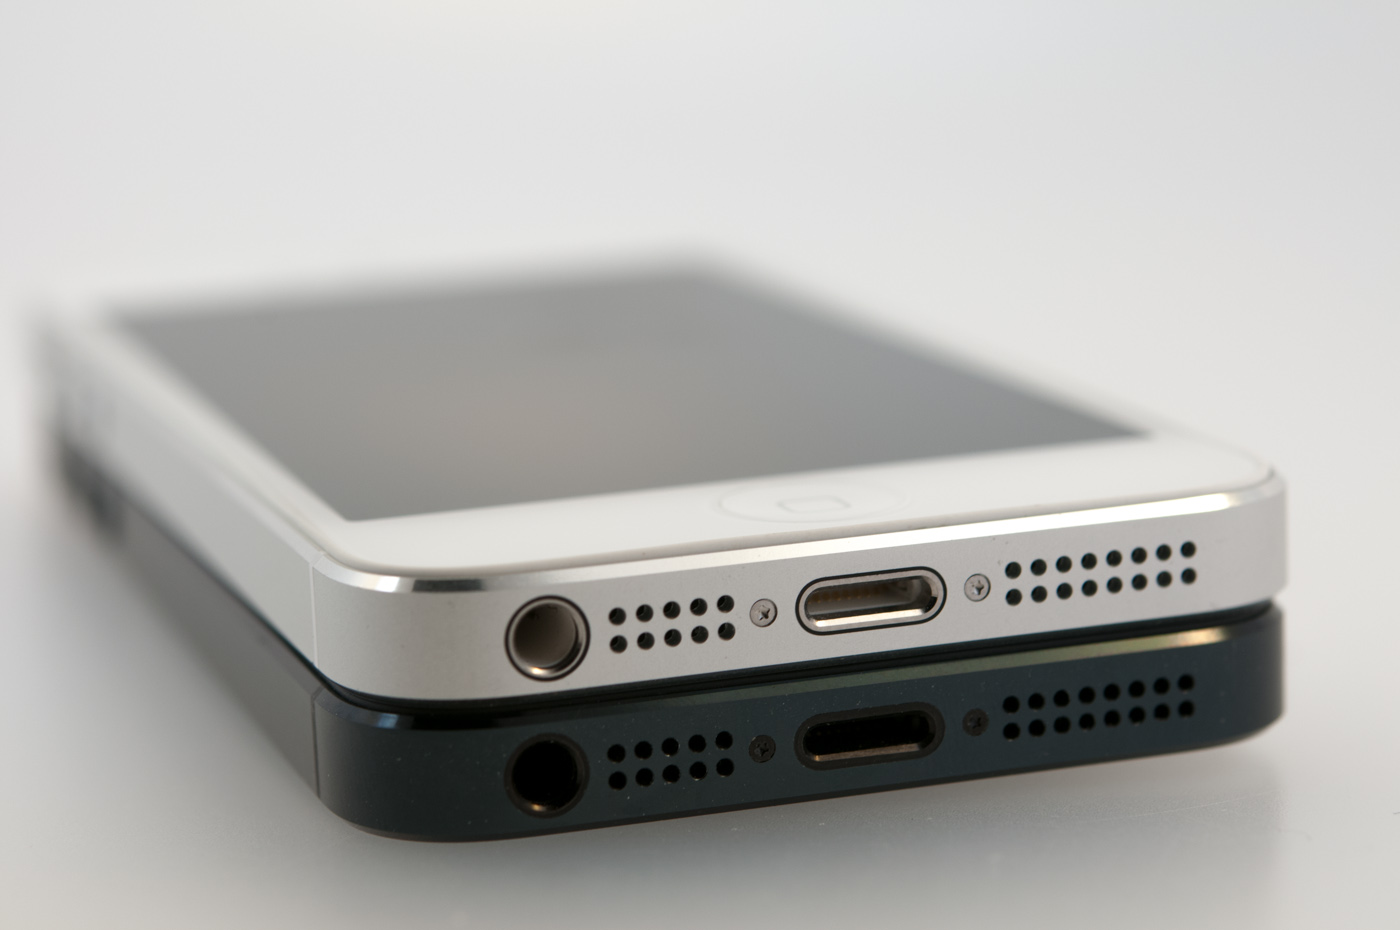 Speakerphone Quality and Noise Suppression - The iPhone 5 Review